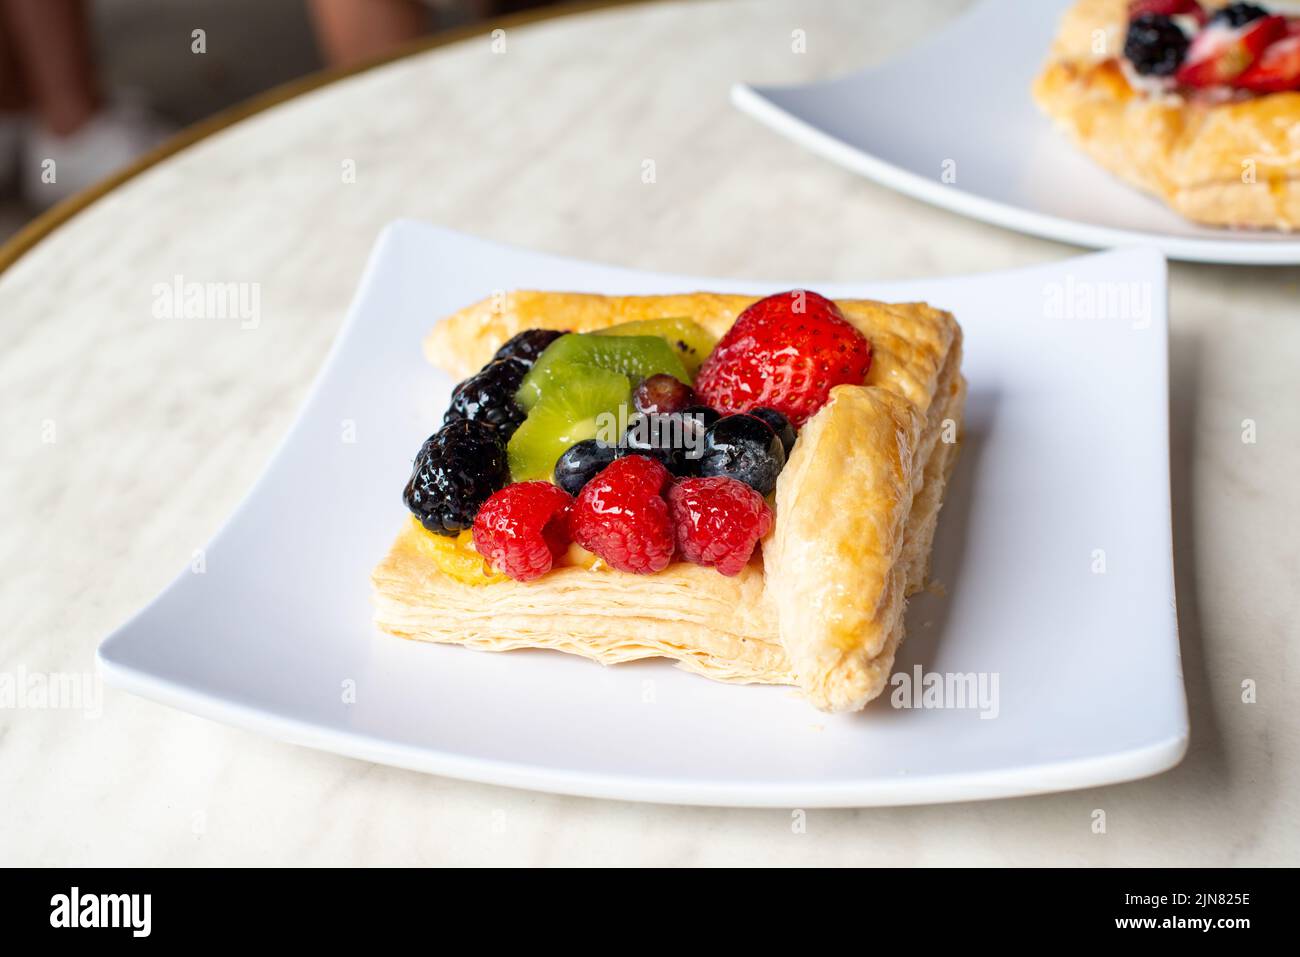 A square fruit filled French puff pastry on a white square plate. The cream and custard filled dessert has strawberries, kiwi, and blackberries on top Stock Photo